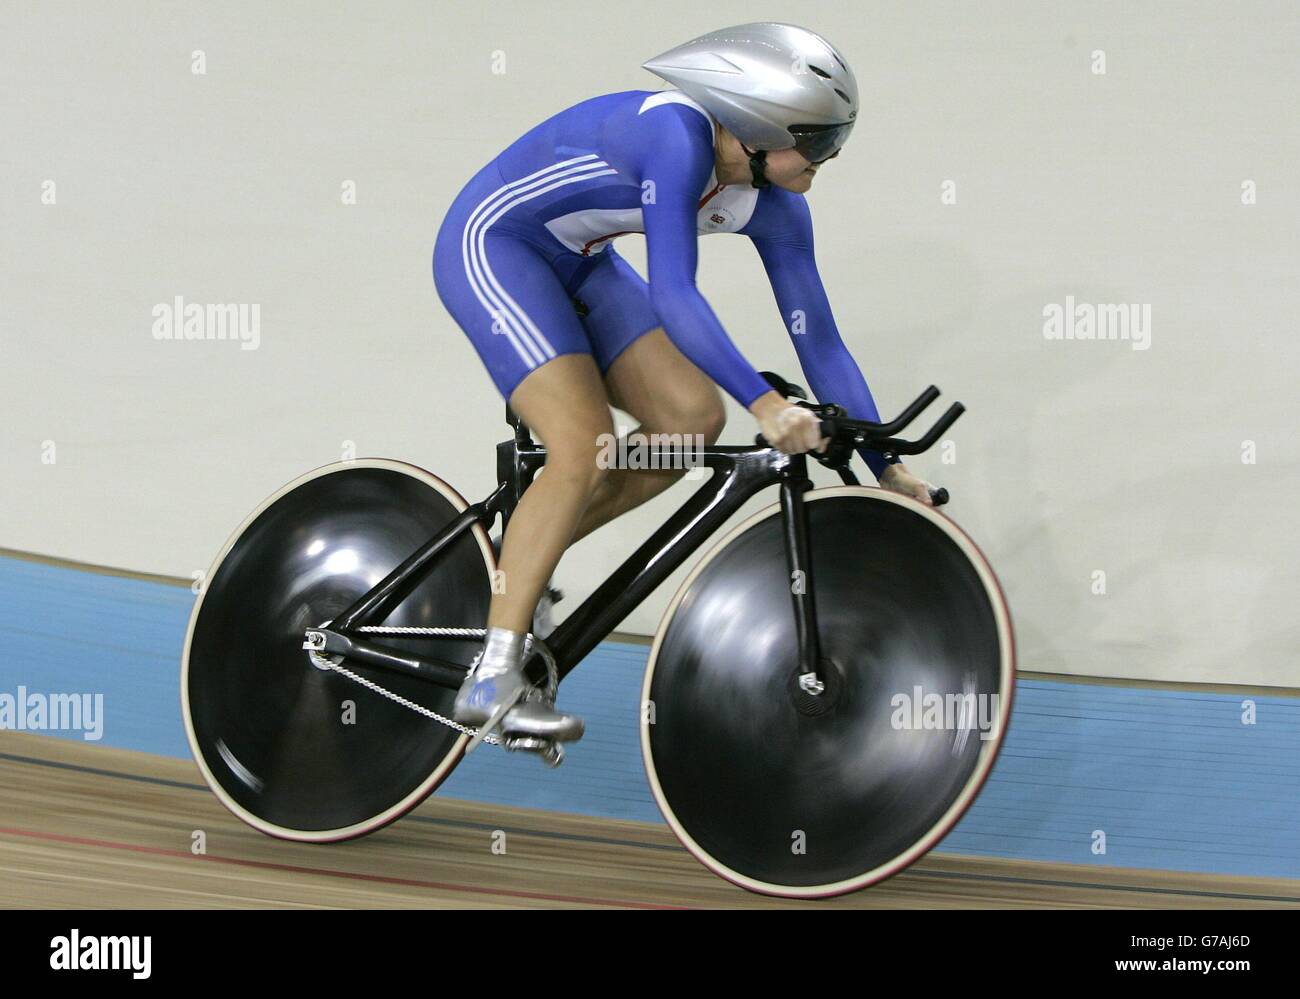 Great Britain's Victoria Pendleton competes in the Track Cycling Women's 500m Time Trial at the Olympic Velodrome in Athens, Greece. Pendleton finished in sixth place. Stock Photo